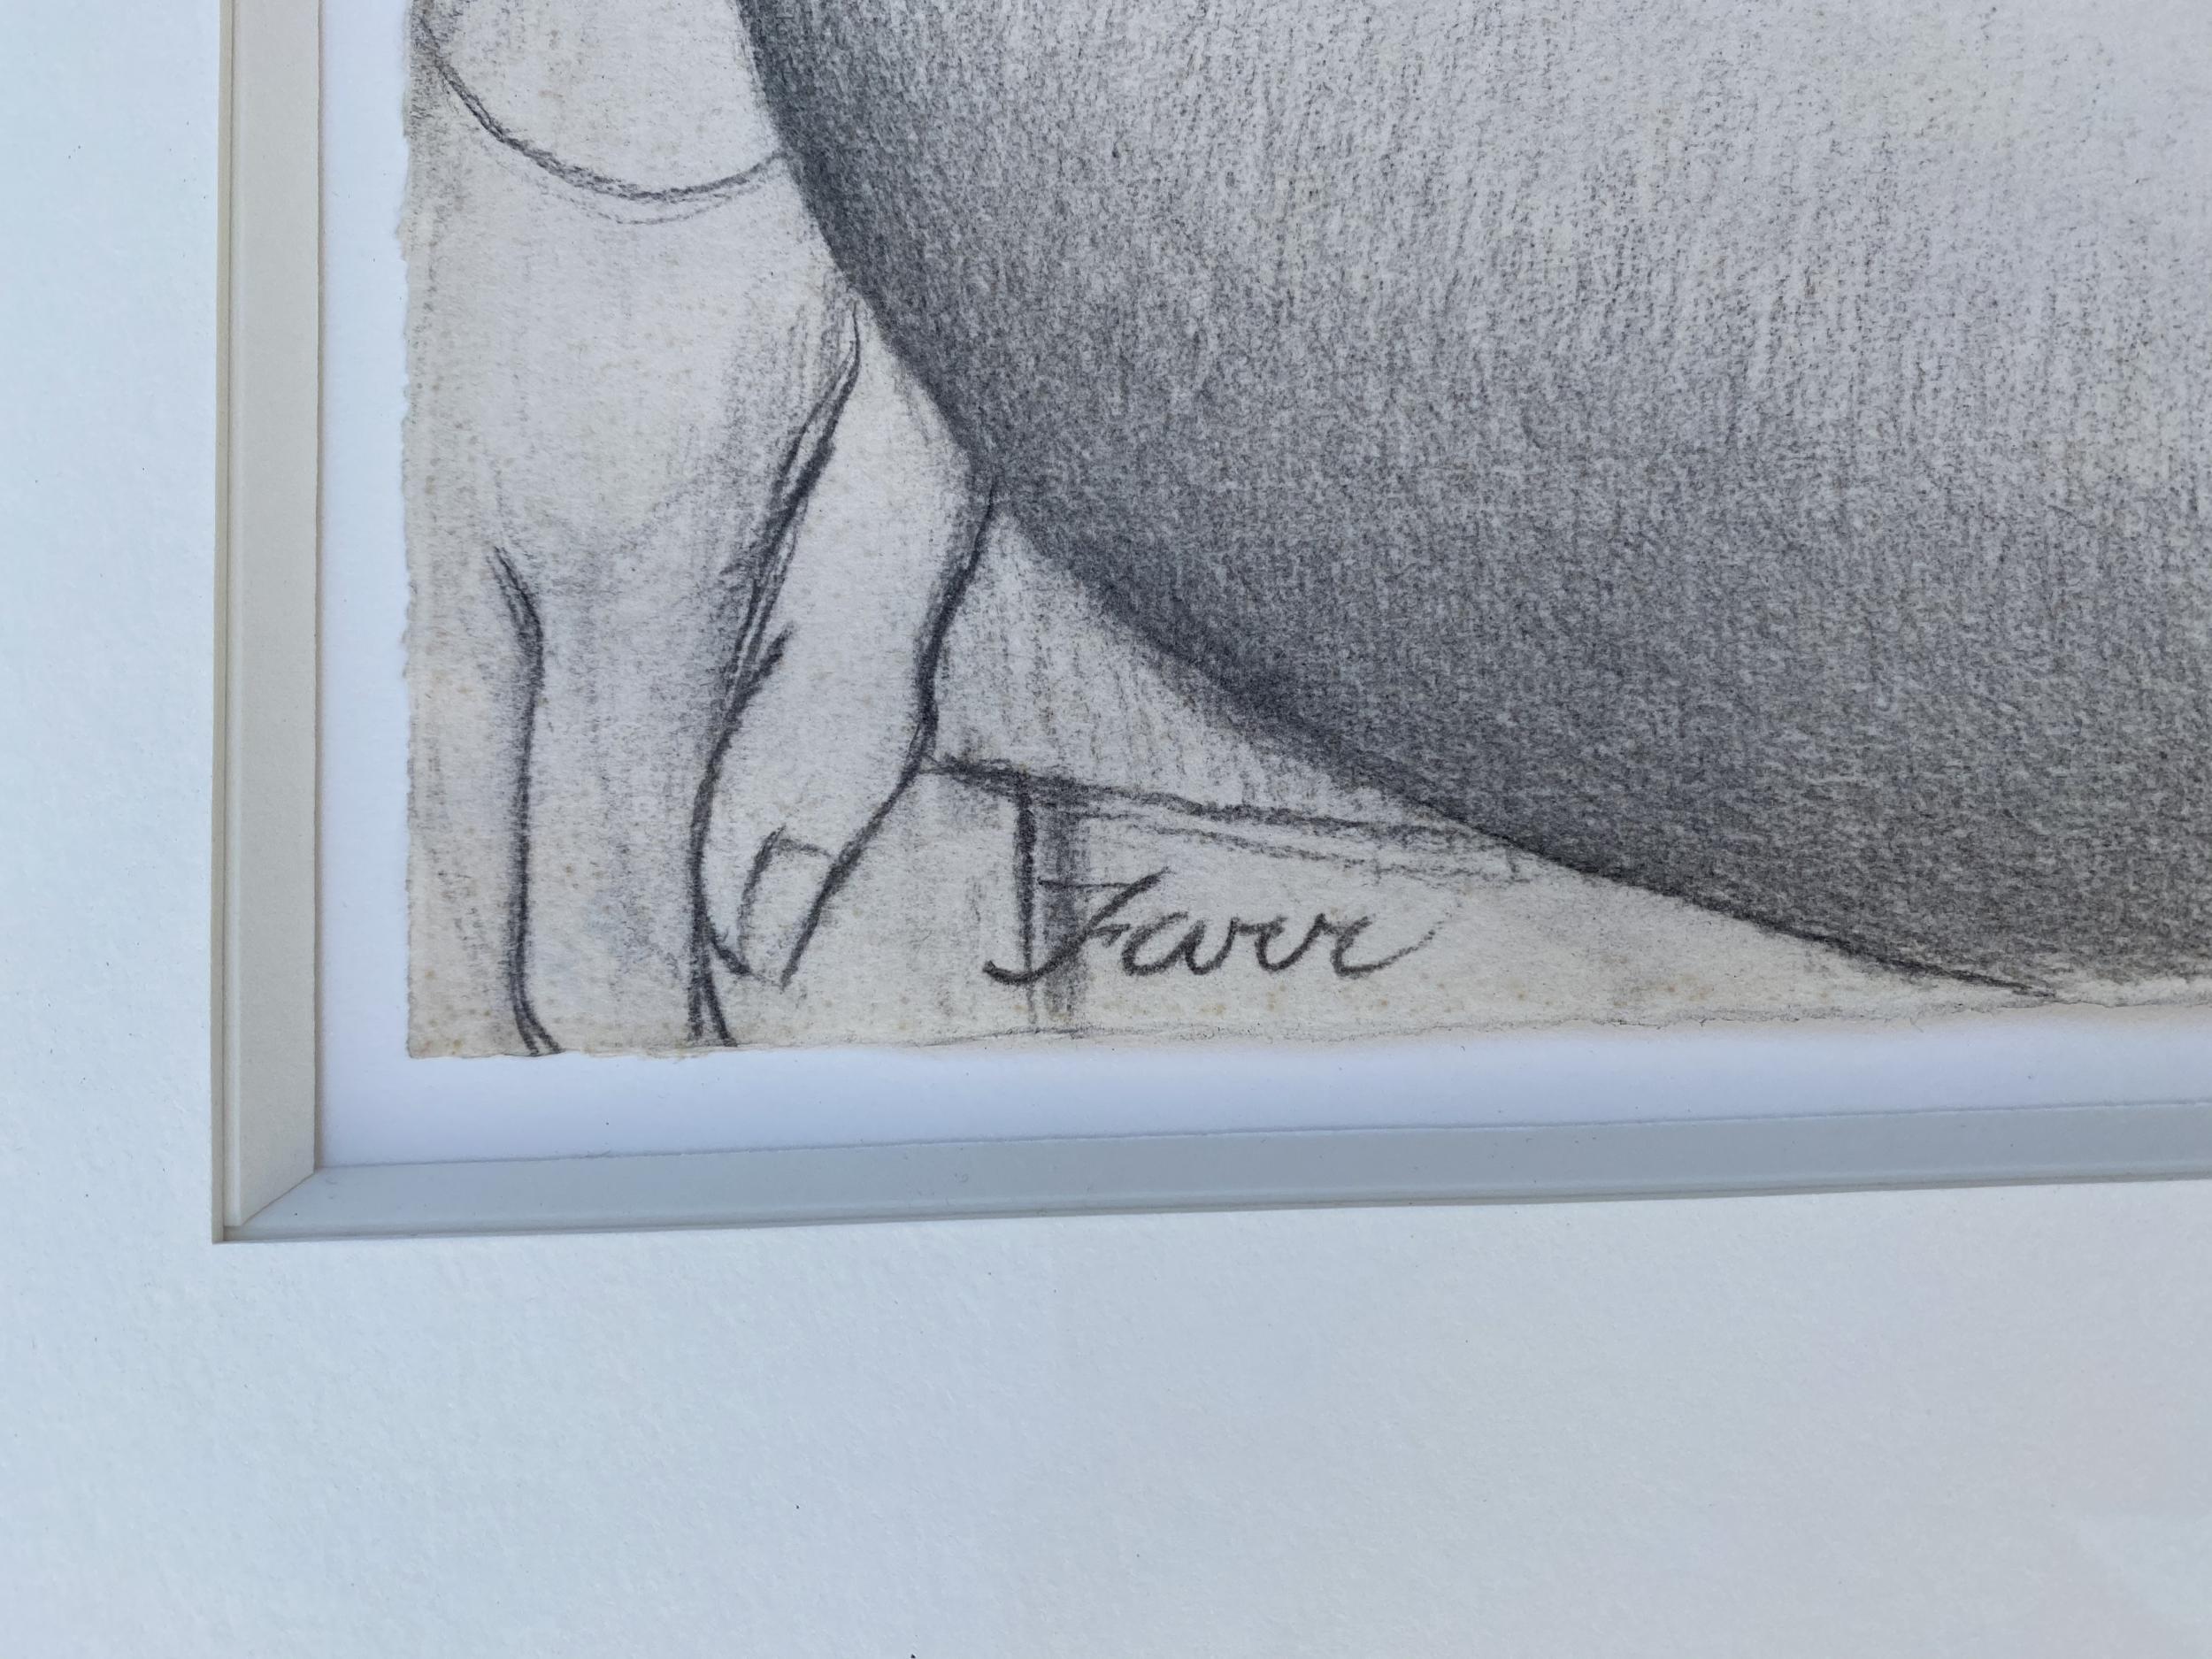 American Nude Female Charcoal Signed Jonathan Farr in Original Frame